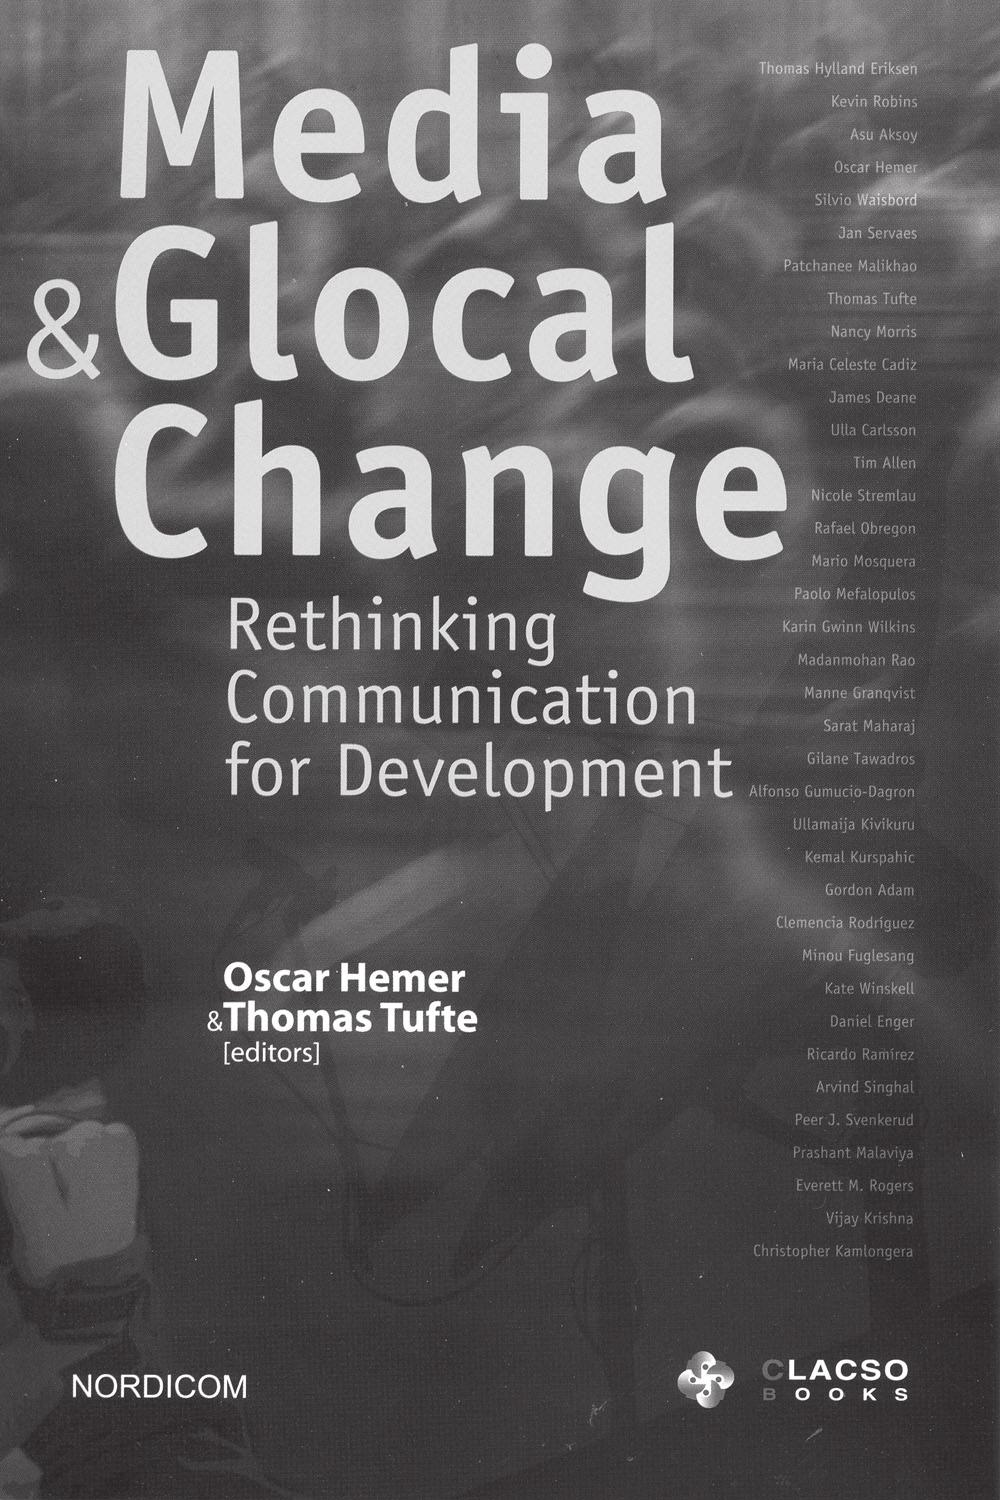 NEW BOOK FROM NORDICOM This book is about exploring both the potential and the limits of communication of using communication both as a tool and as a way of articulating processes of development and